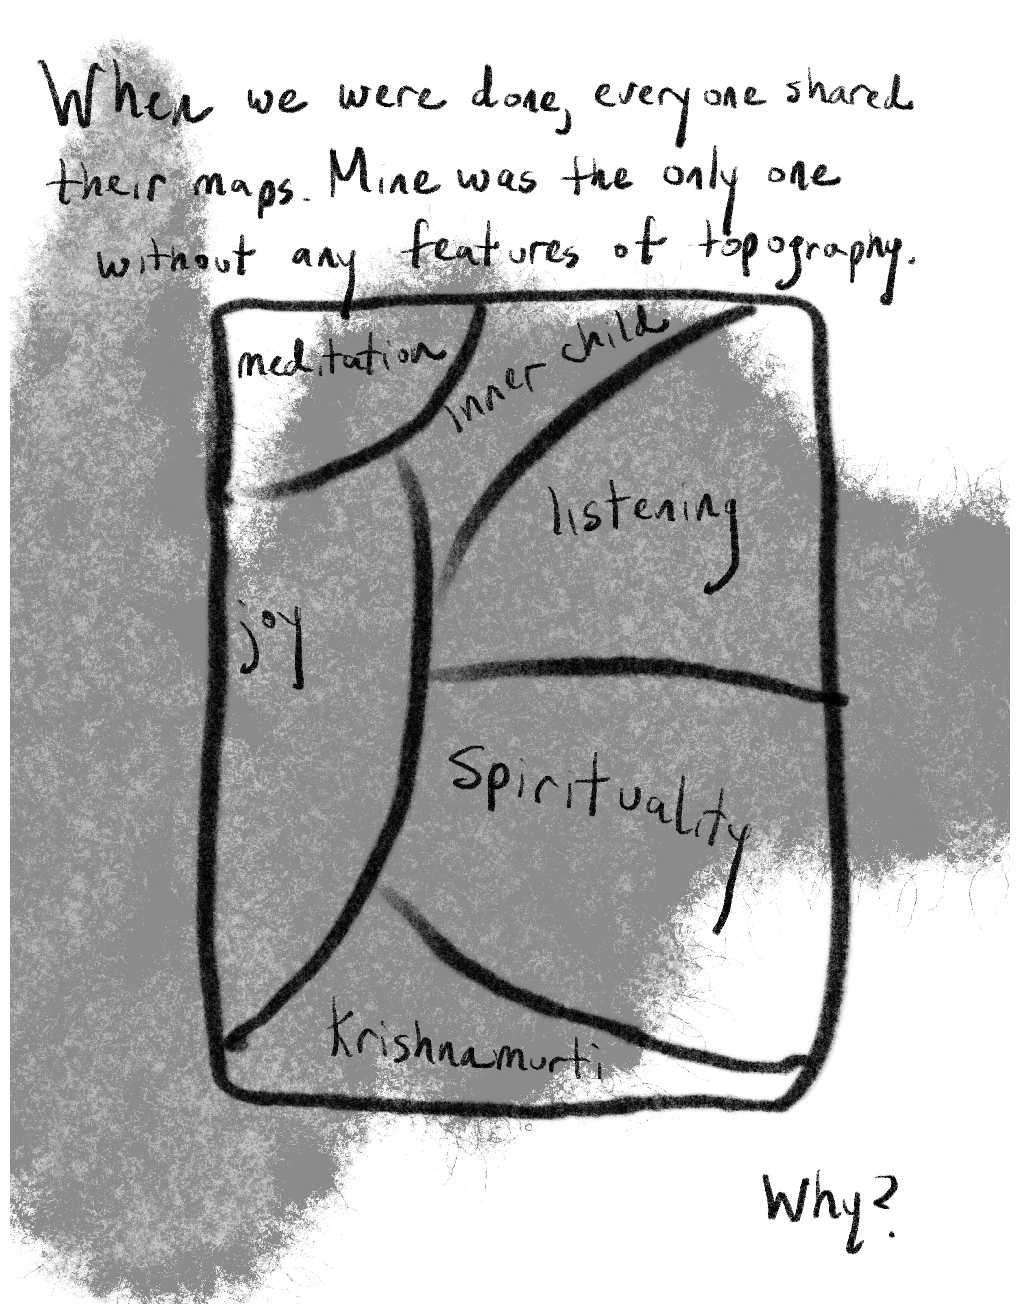 Panel 2 of a four-panel comic called "Disembodied and alone'', consisting of thick black line drawing on a mottled grey and white background. A rectangle divided into areas by thick black curved lines fills most of the panel. The areas are labelled as: meditation, inner child, joy, listening, spirituality and Krishnamurti. Above the rectangle a block of hand-written text says "When we were done, everyone shared their maps. Mine was the only one without any features of topography." Below the rectangle on the bottom right of the panel is the word "Why?"